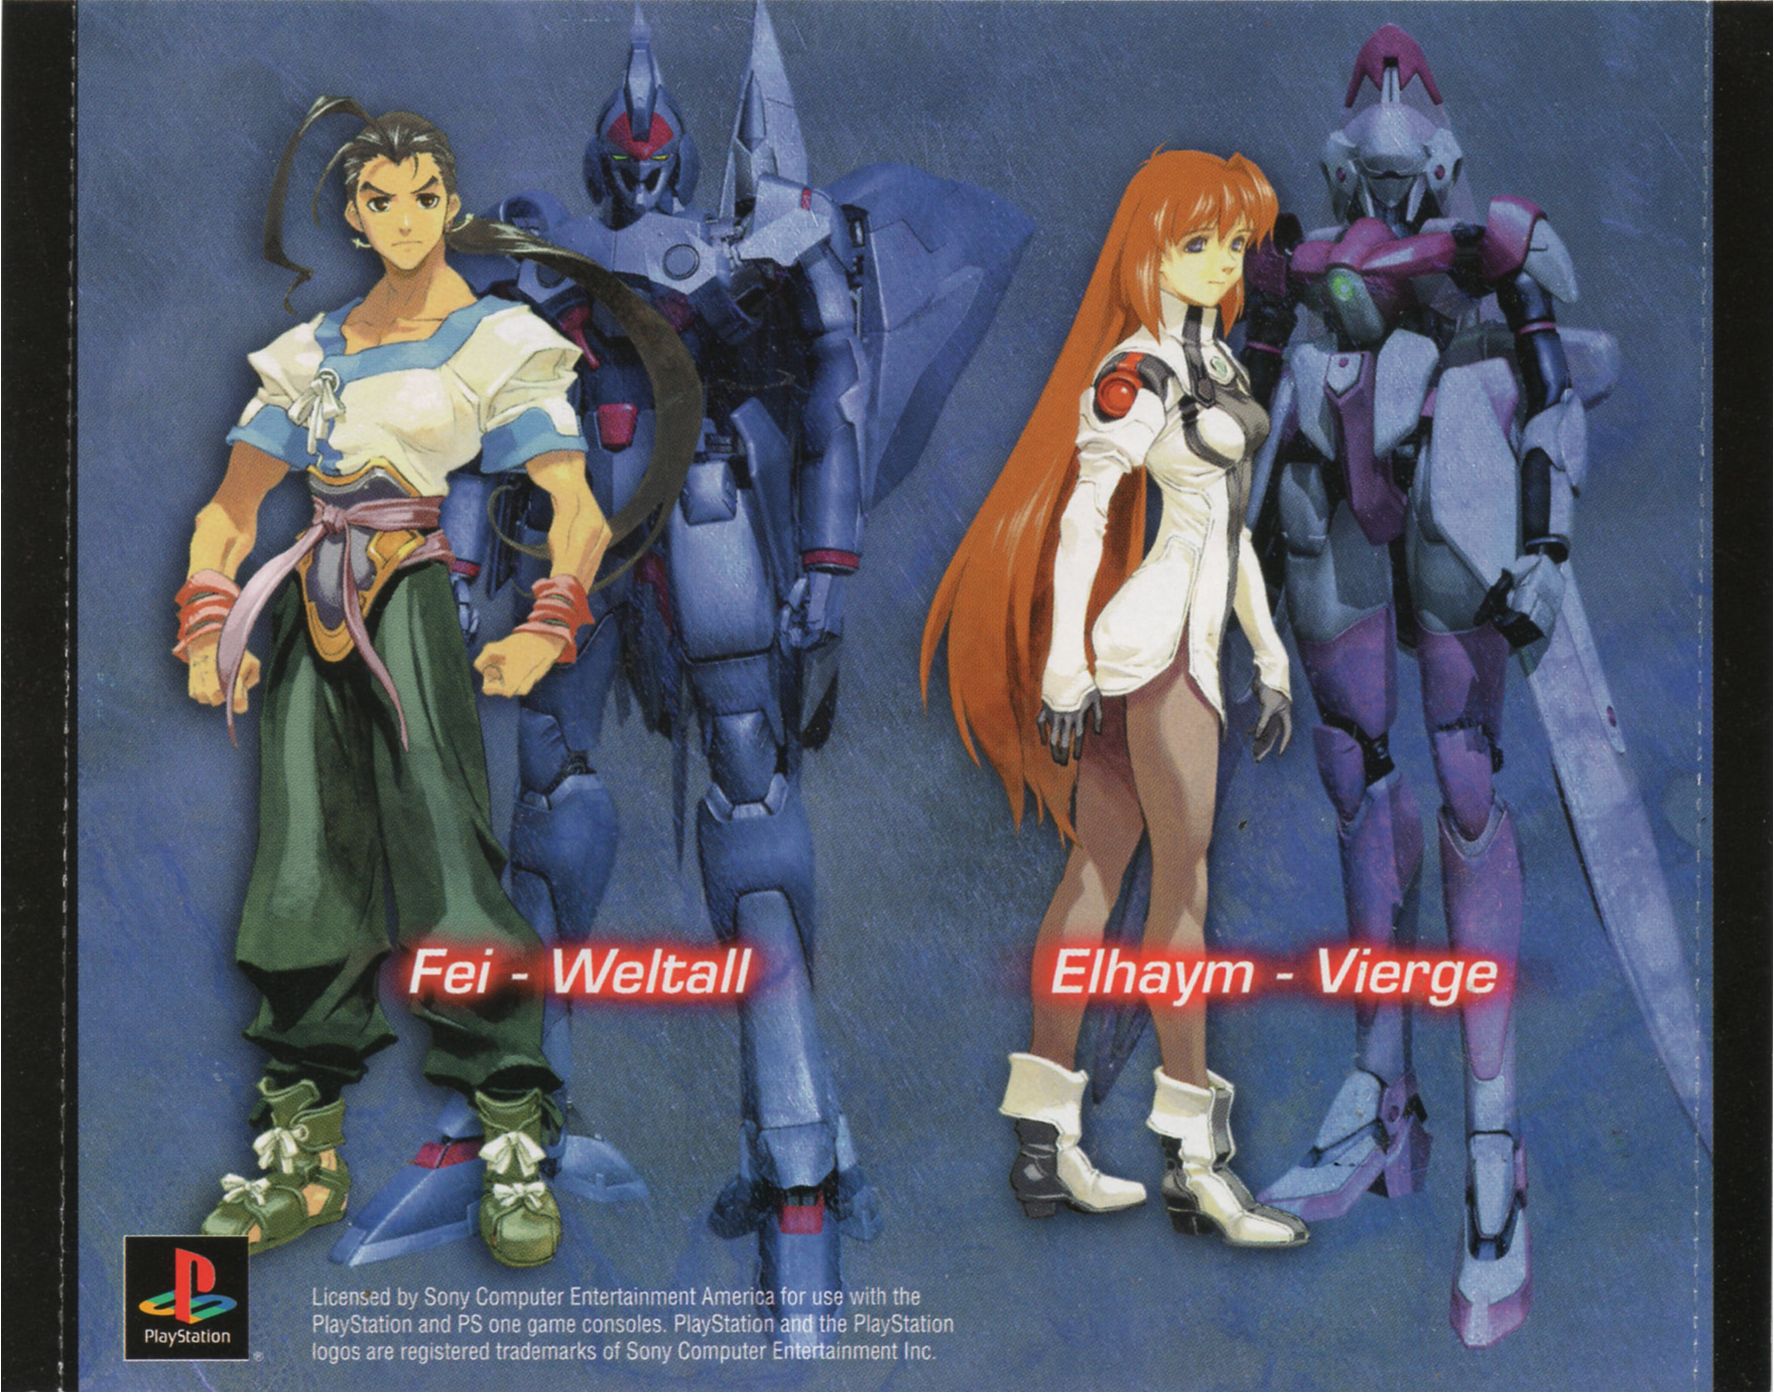 Xenogears PSX cover